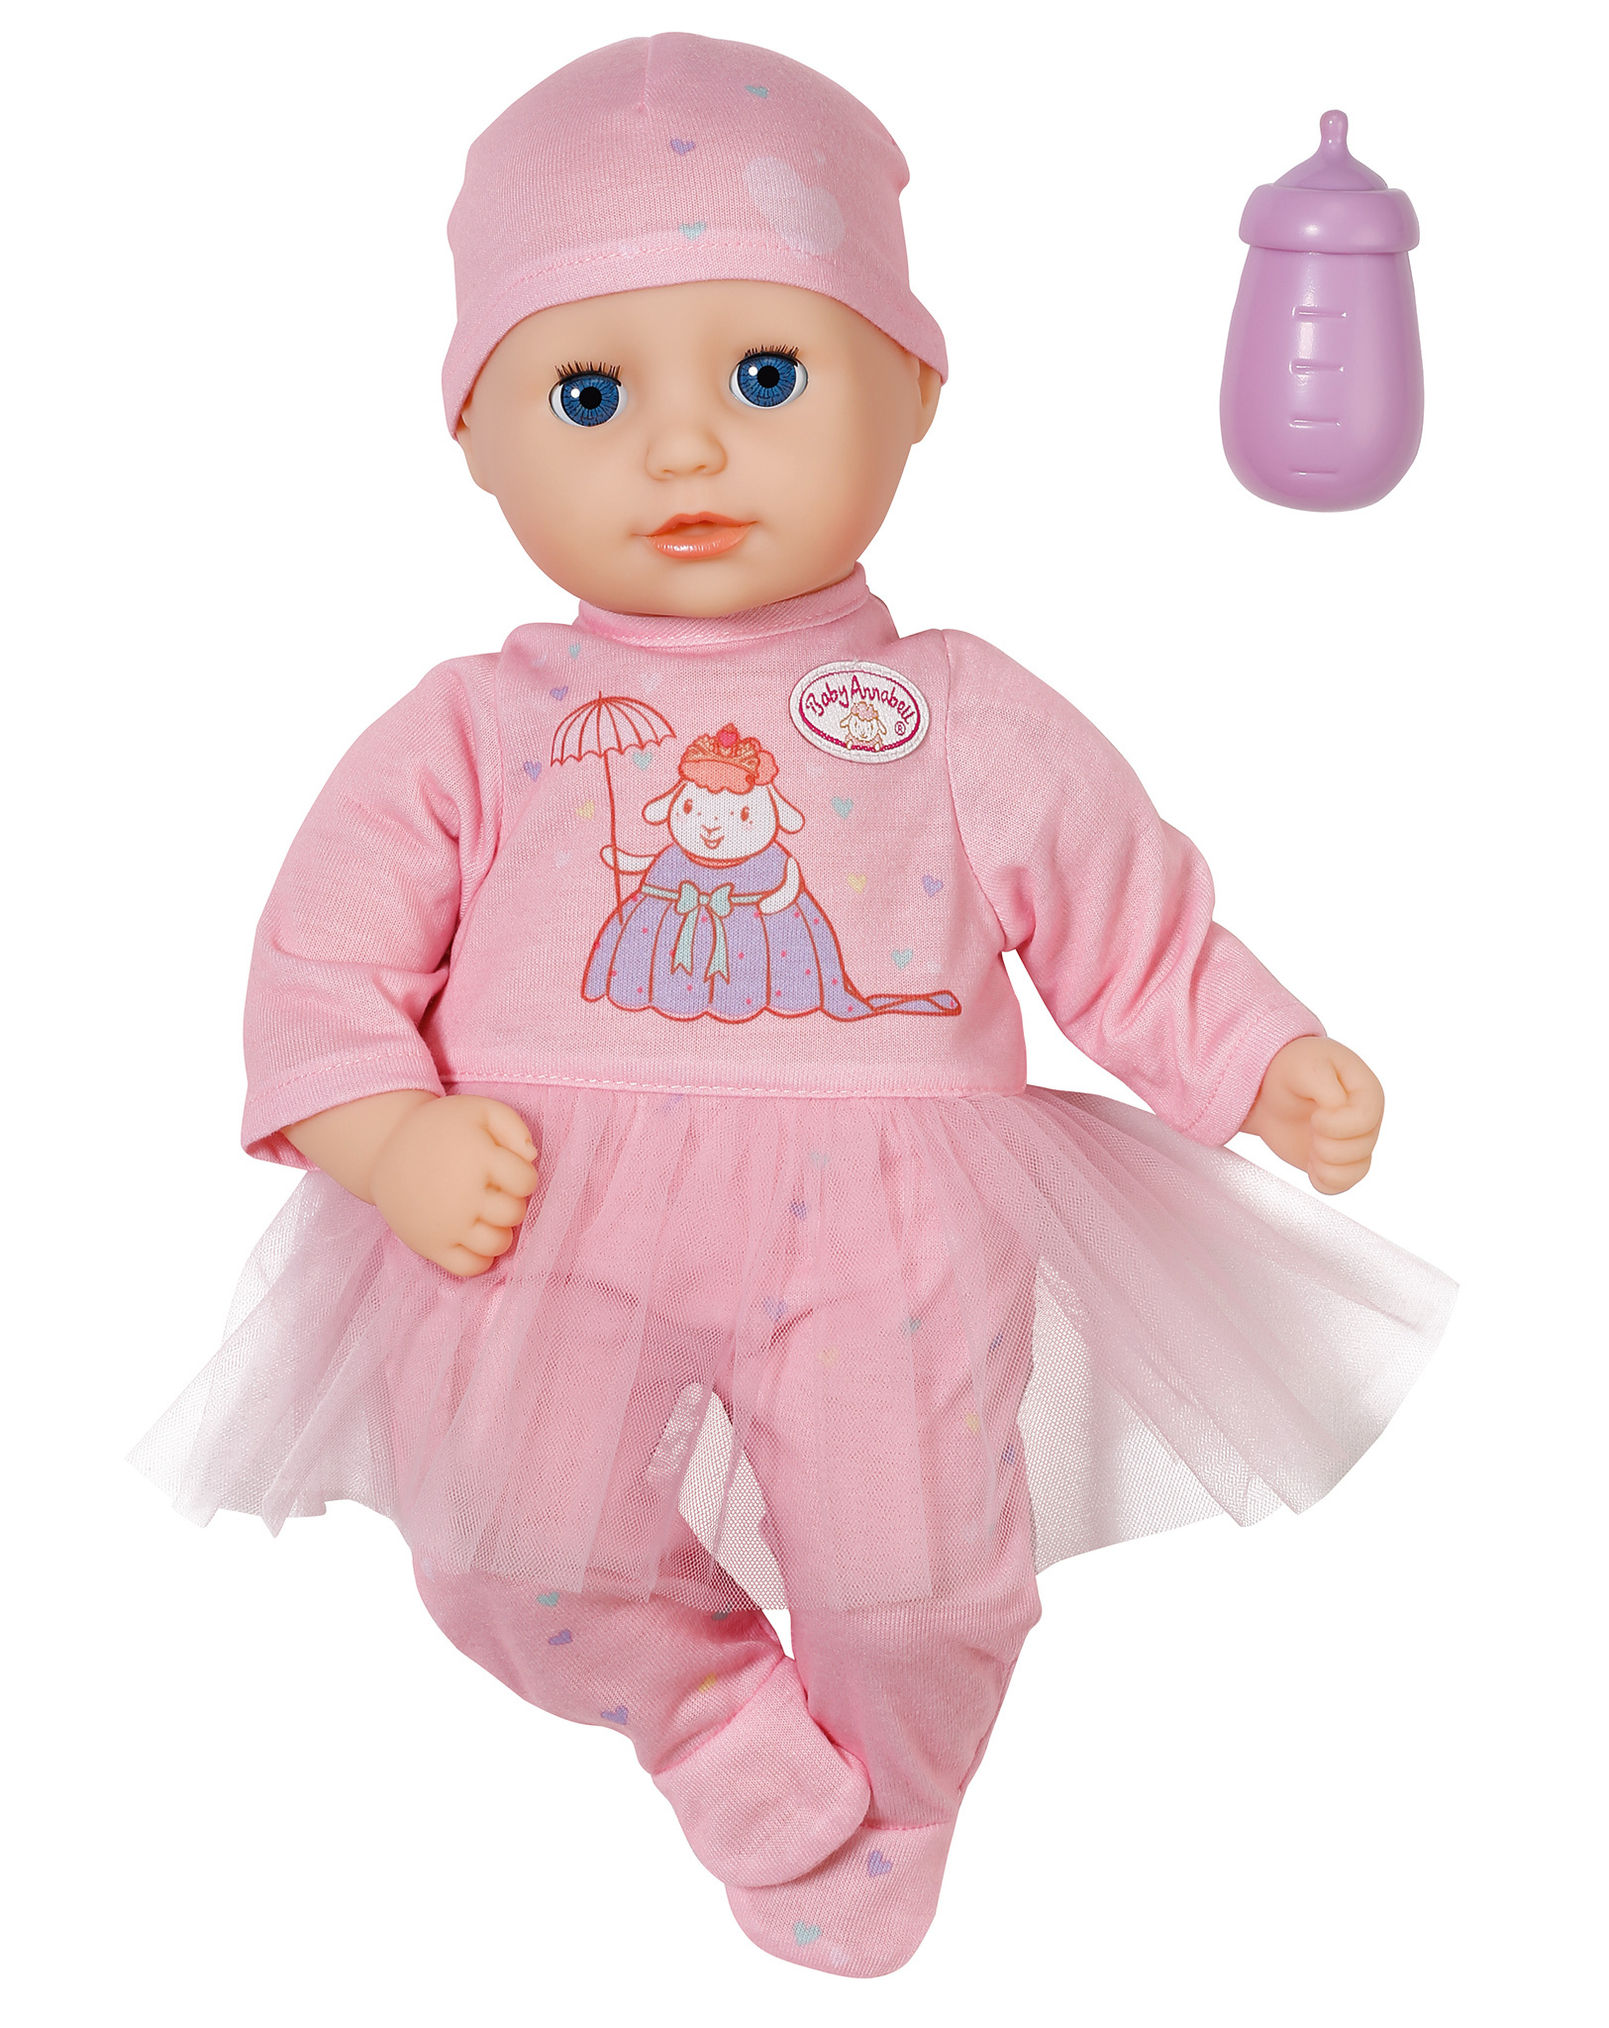 Puppe BABY ANNABELL® - LITTLE SWEET ANNABELL 36cm in rosa kaufen